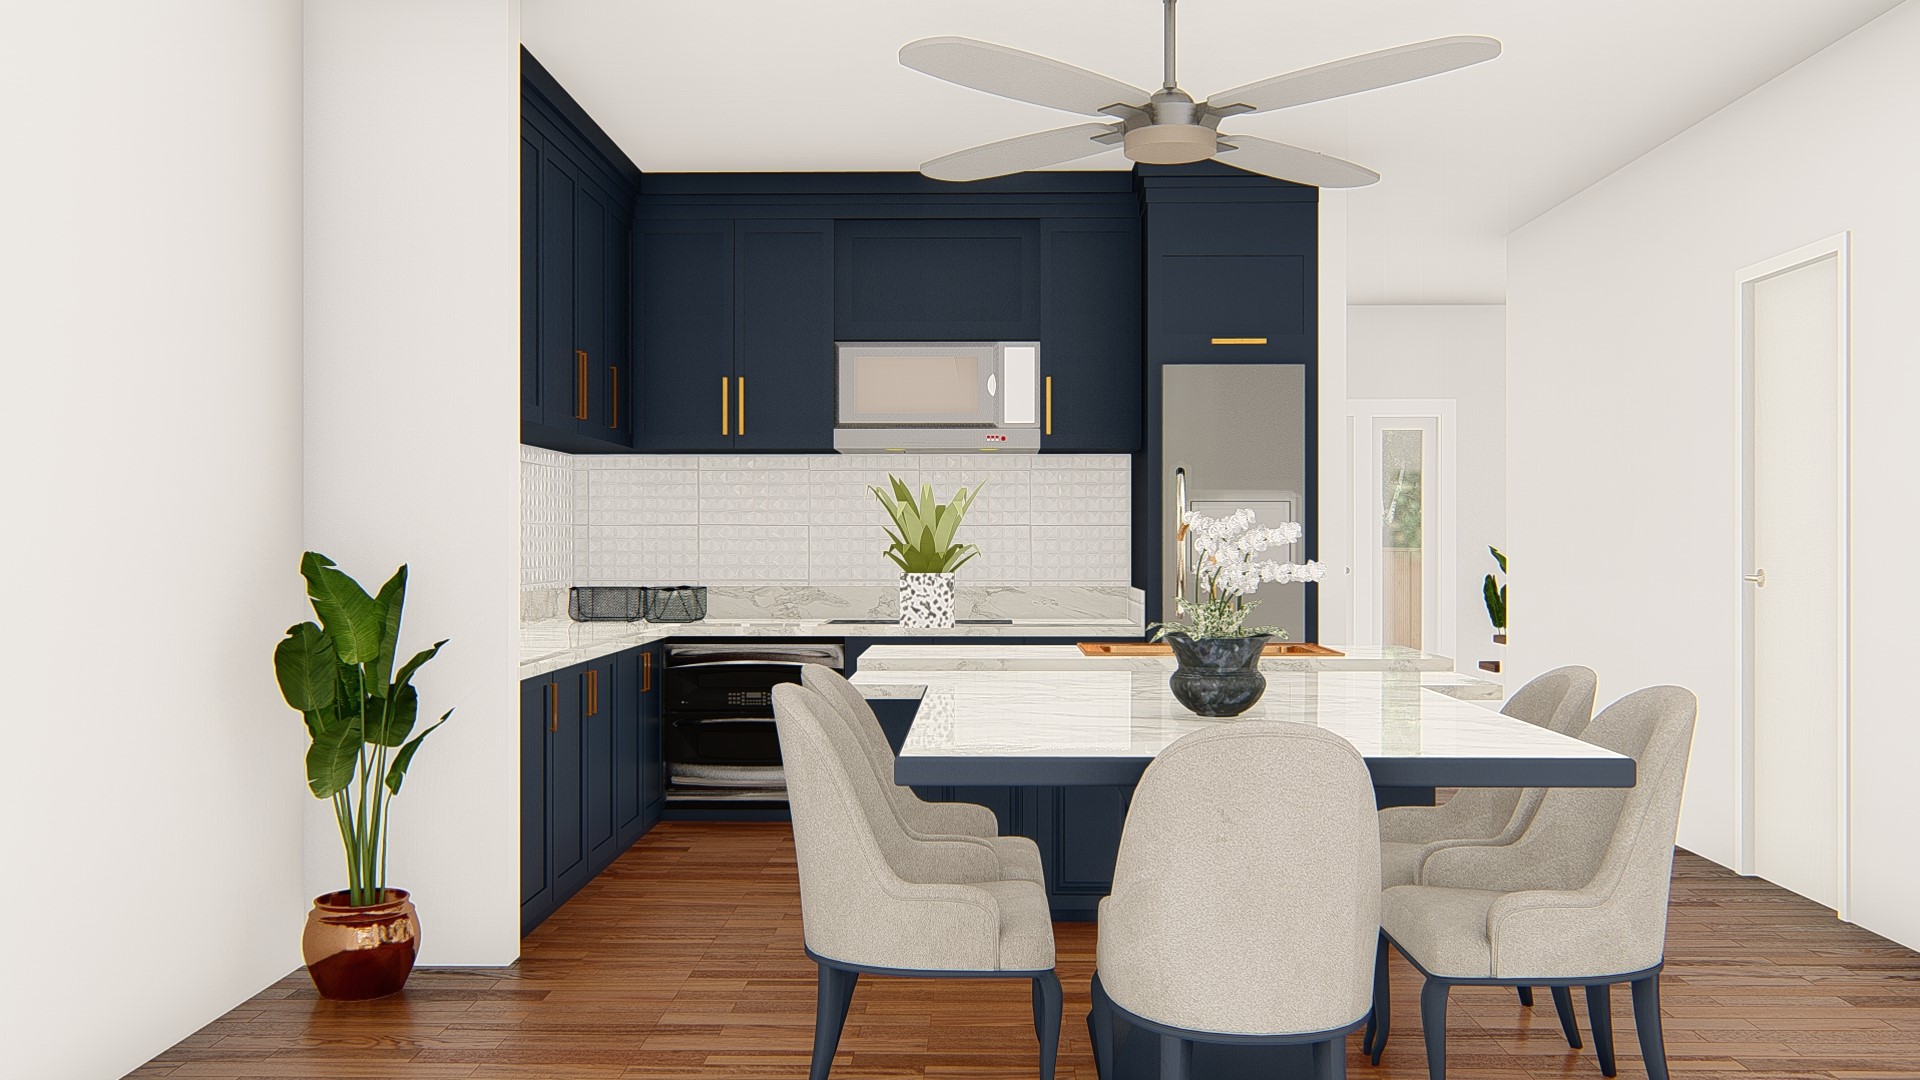 KITCHEN_DINING COMBO.  This image is a close rendering of the final product